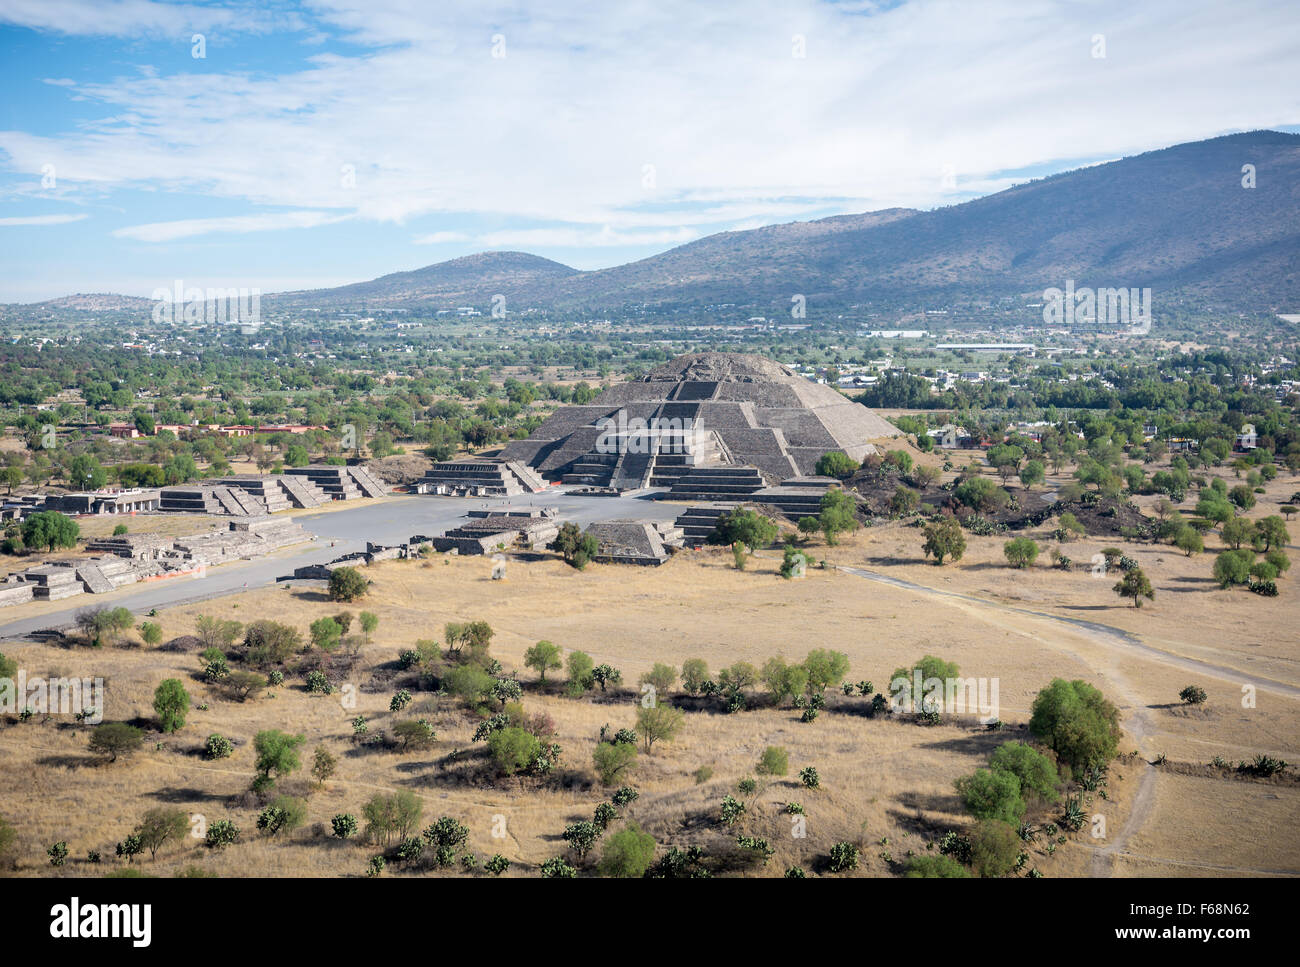 The pyramid of the moon and the alley of the dead in Teotihuacan Mexico. (Avenida de los muertos) Stock Photo